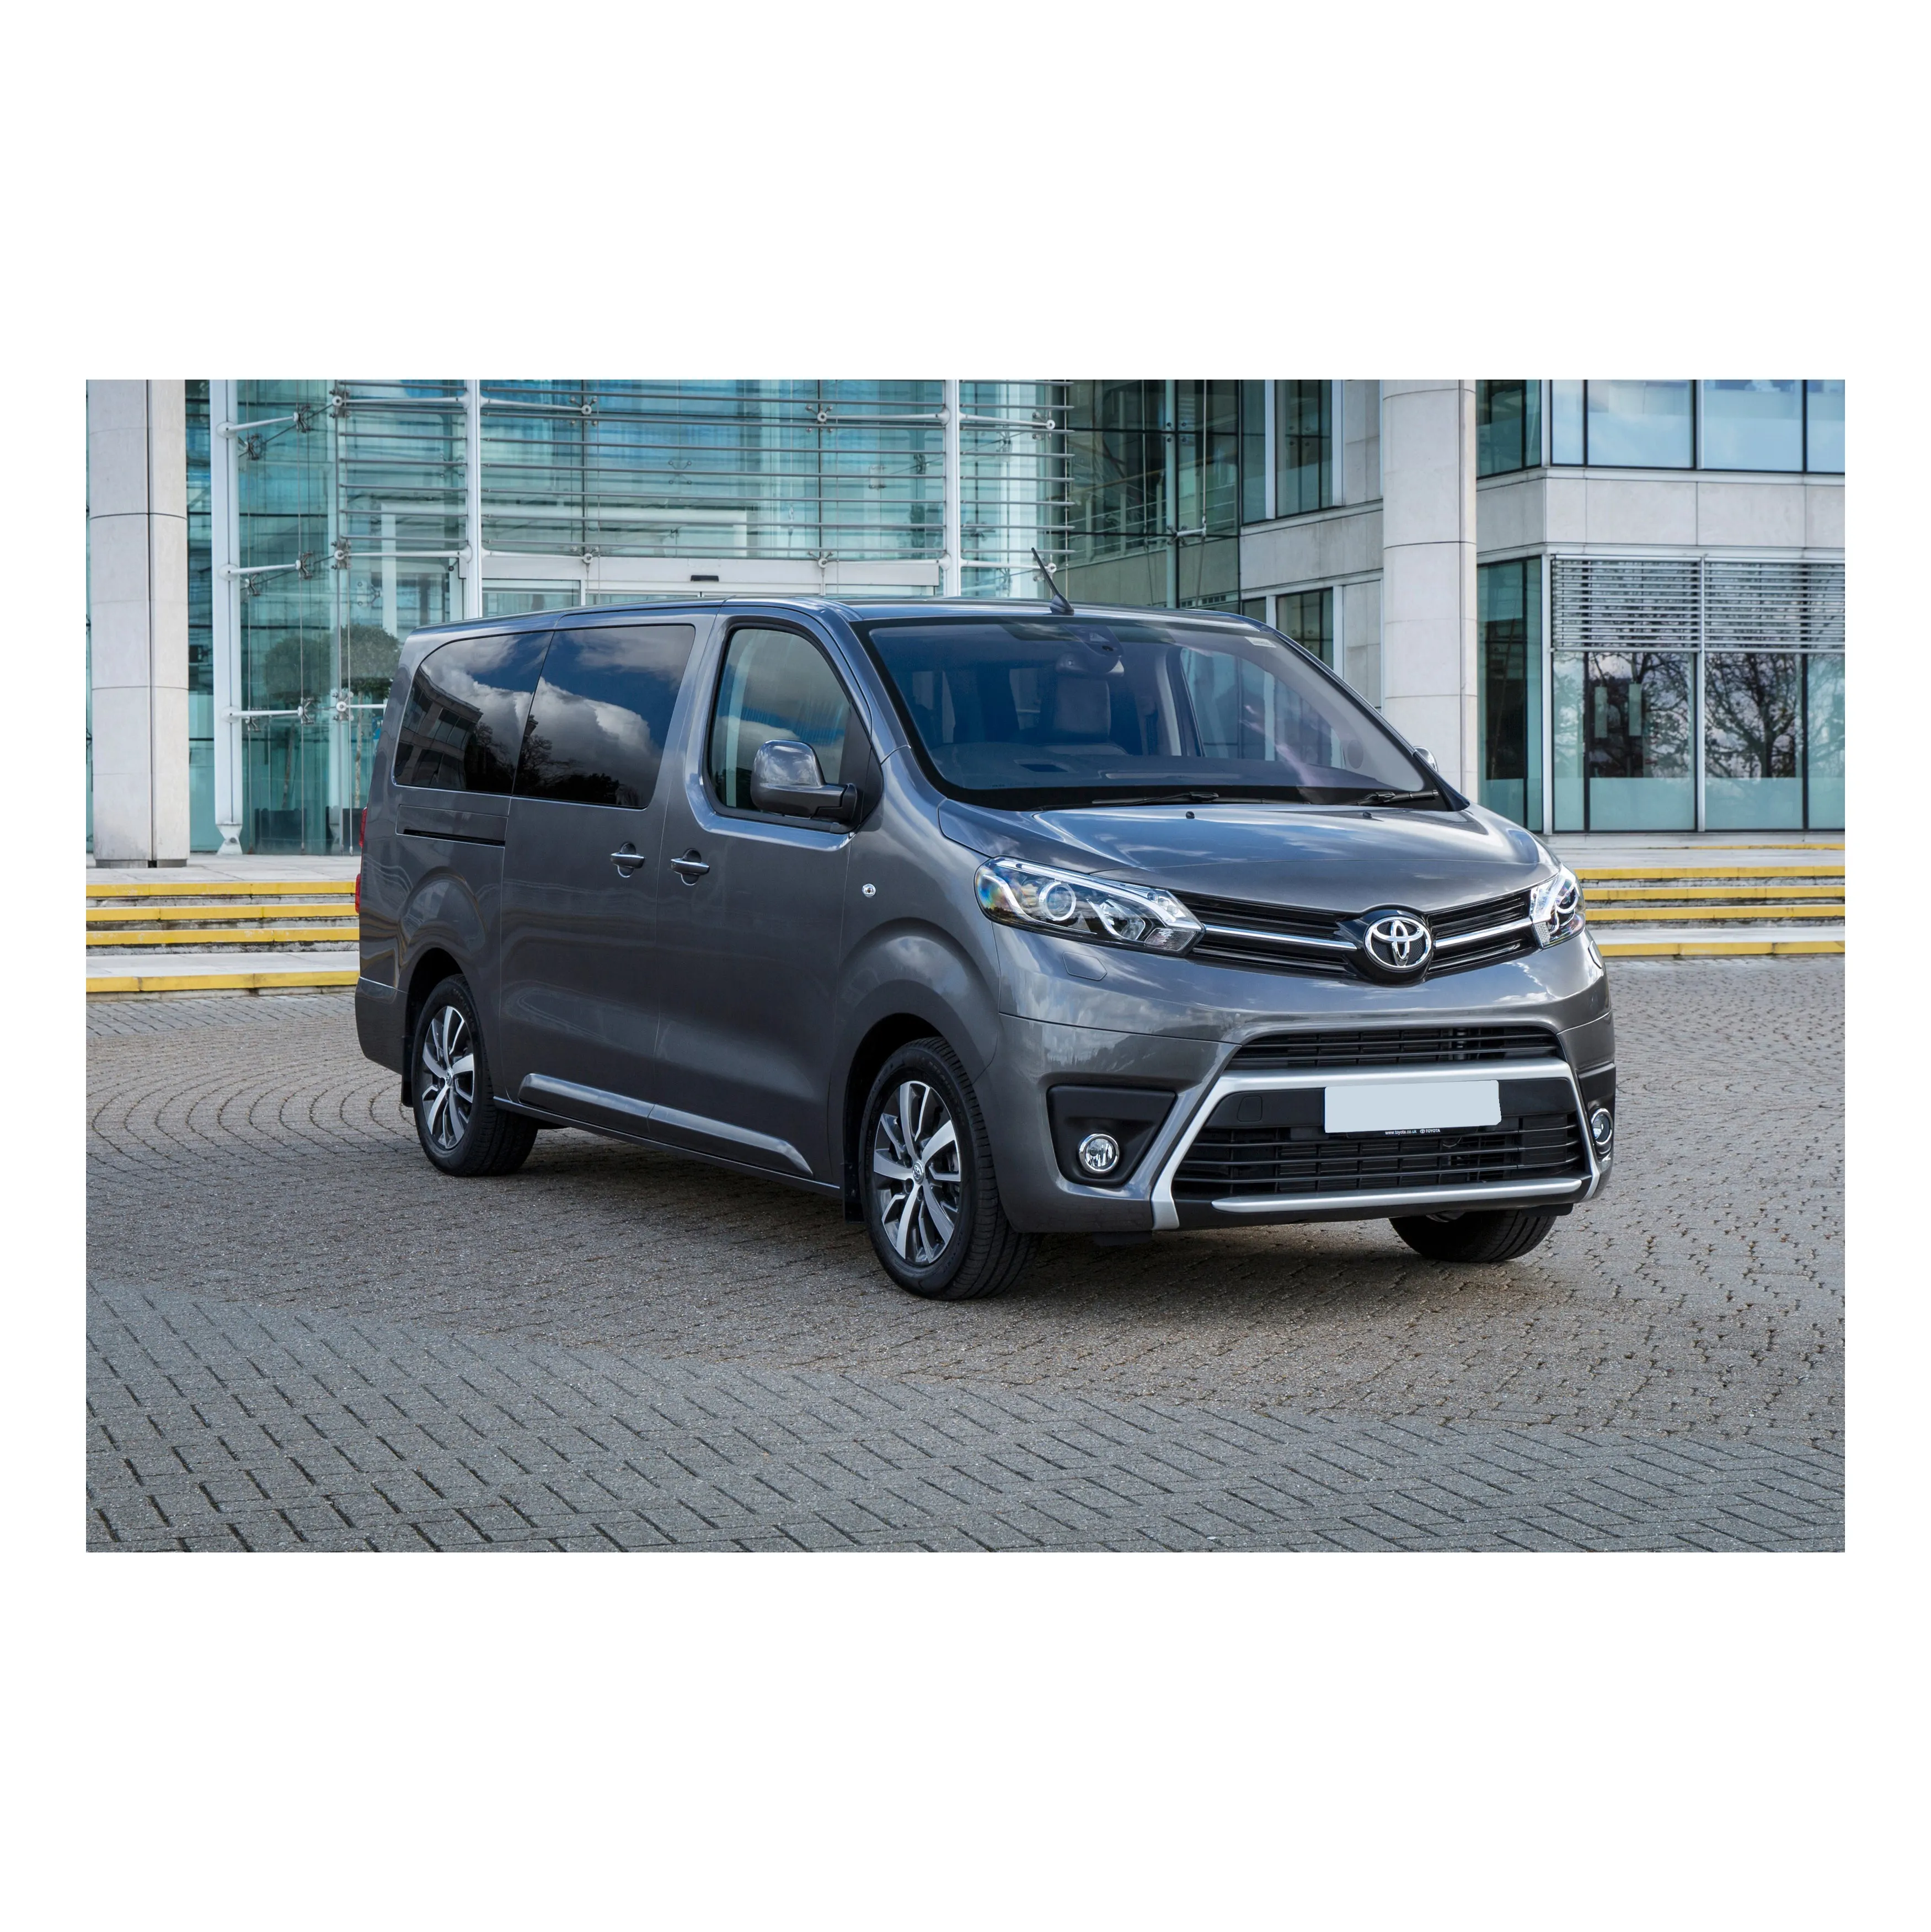 Fairly used Toyota Proace-verso 2.0D 140 Family Medium 5dr/Toyota Proace Verso 2.0D 180 VIP Long 5dr Auto 8 speed for sale